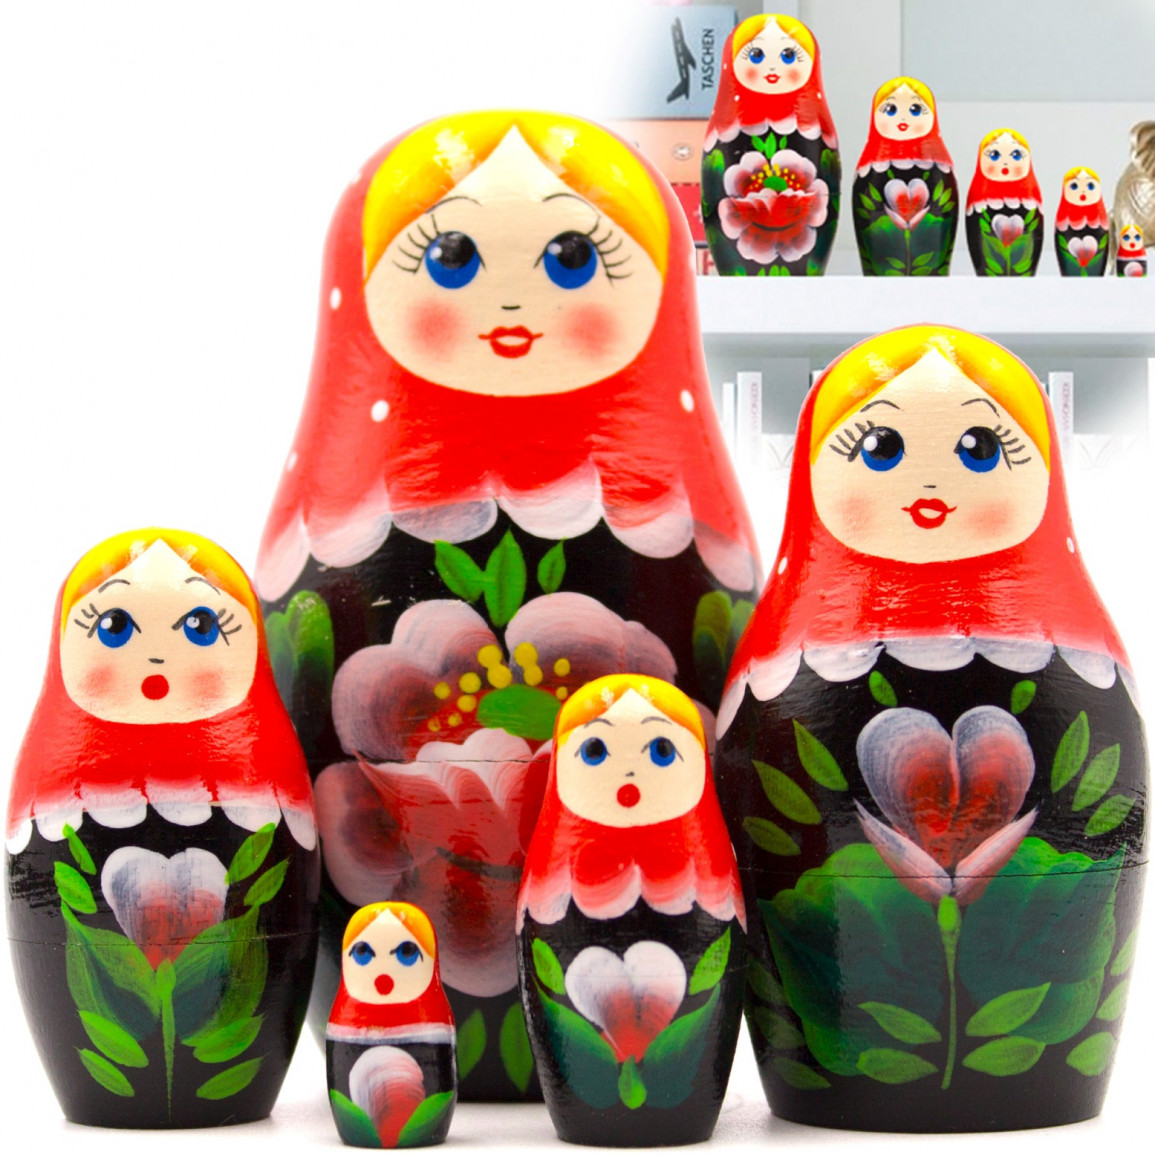 Baboushka Nesting Dolls with Hand Painted Red Roses Russian Doll in Sarafan Dress with Red Rose Decorations Matryoshka Nesting Dolls Set of 7 pcs 